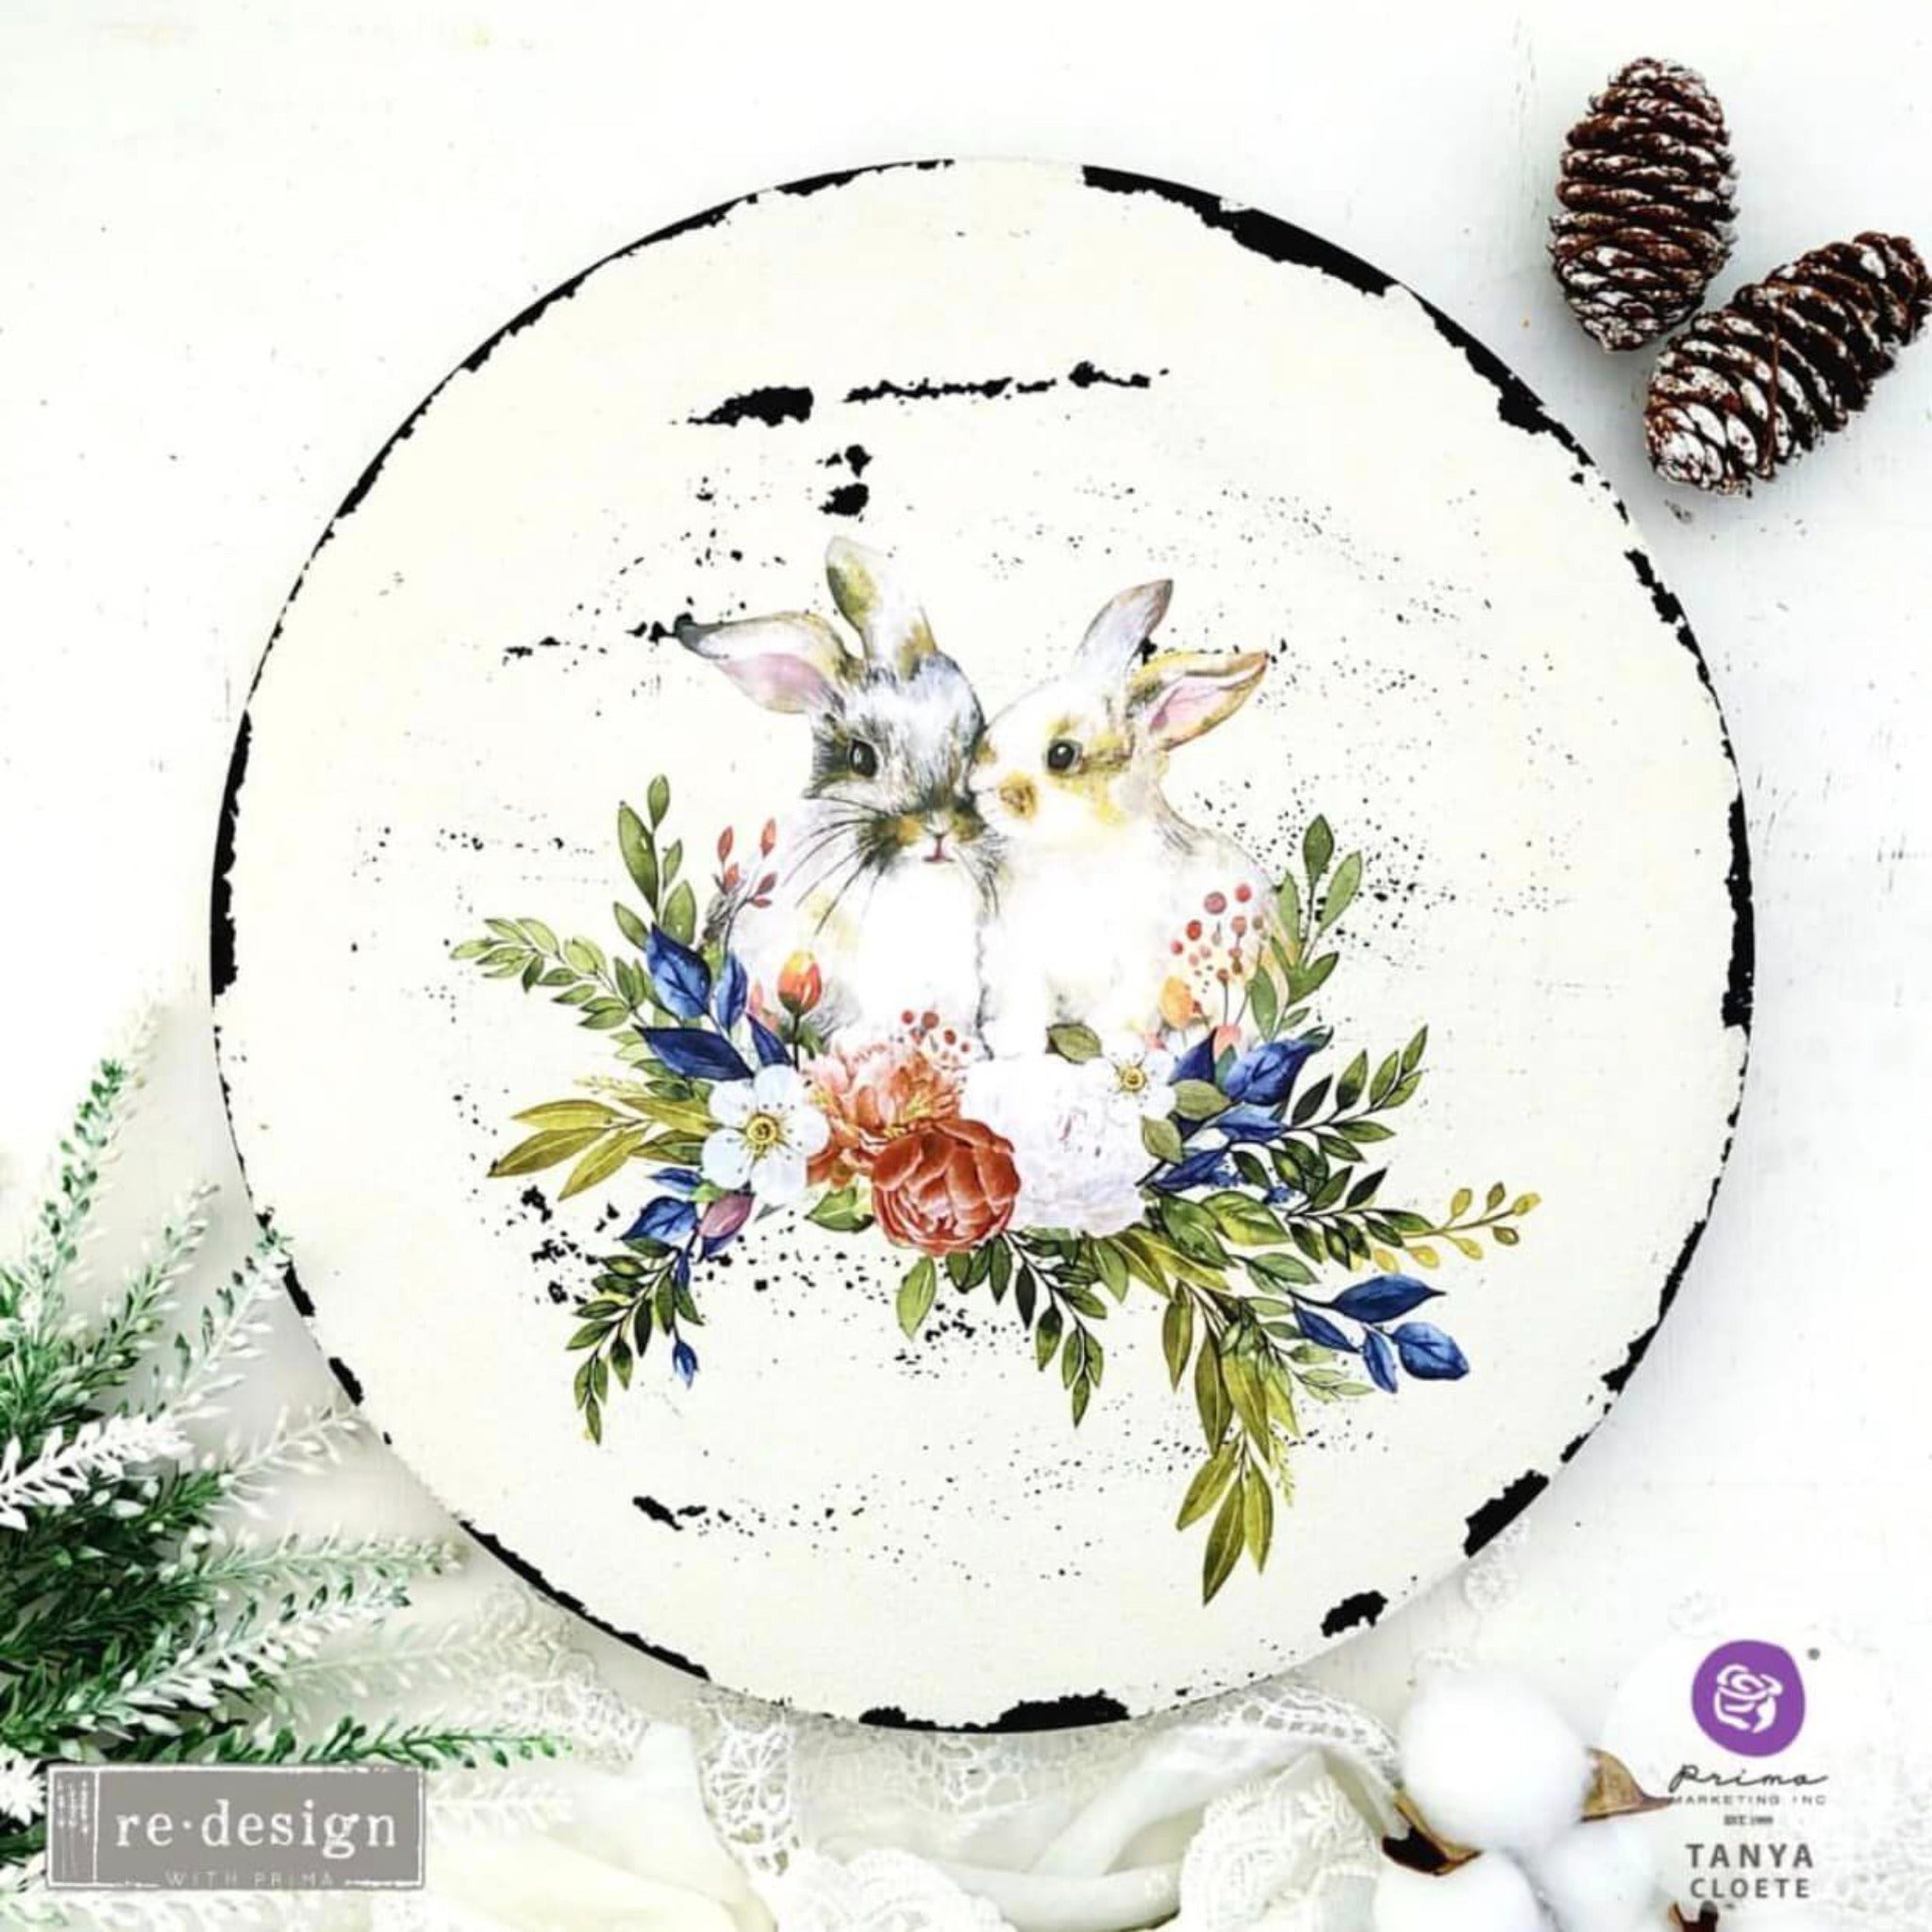 A Lazy Susan refurbished by Tanya Cloete is painted white with black distressed edges and features ReDesign with Prima's Cottontail small transfer on it.